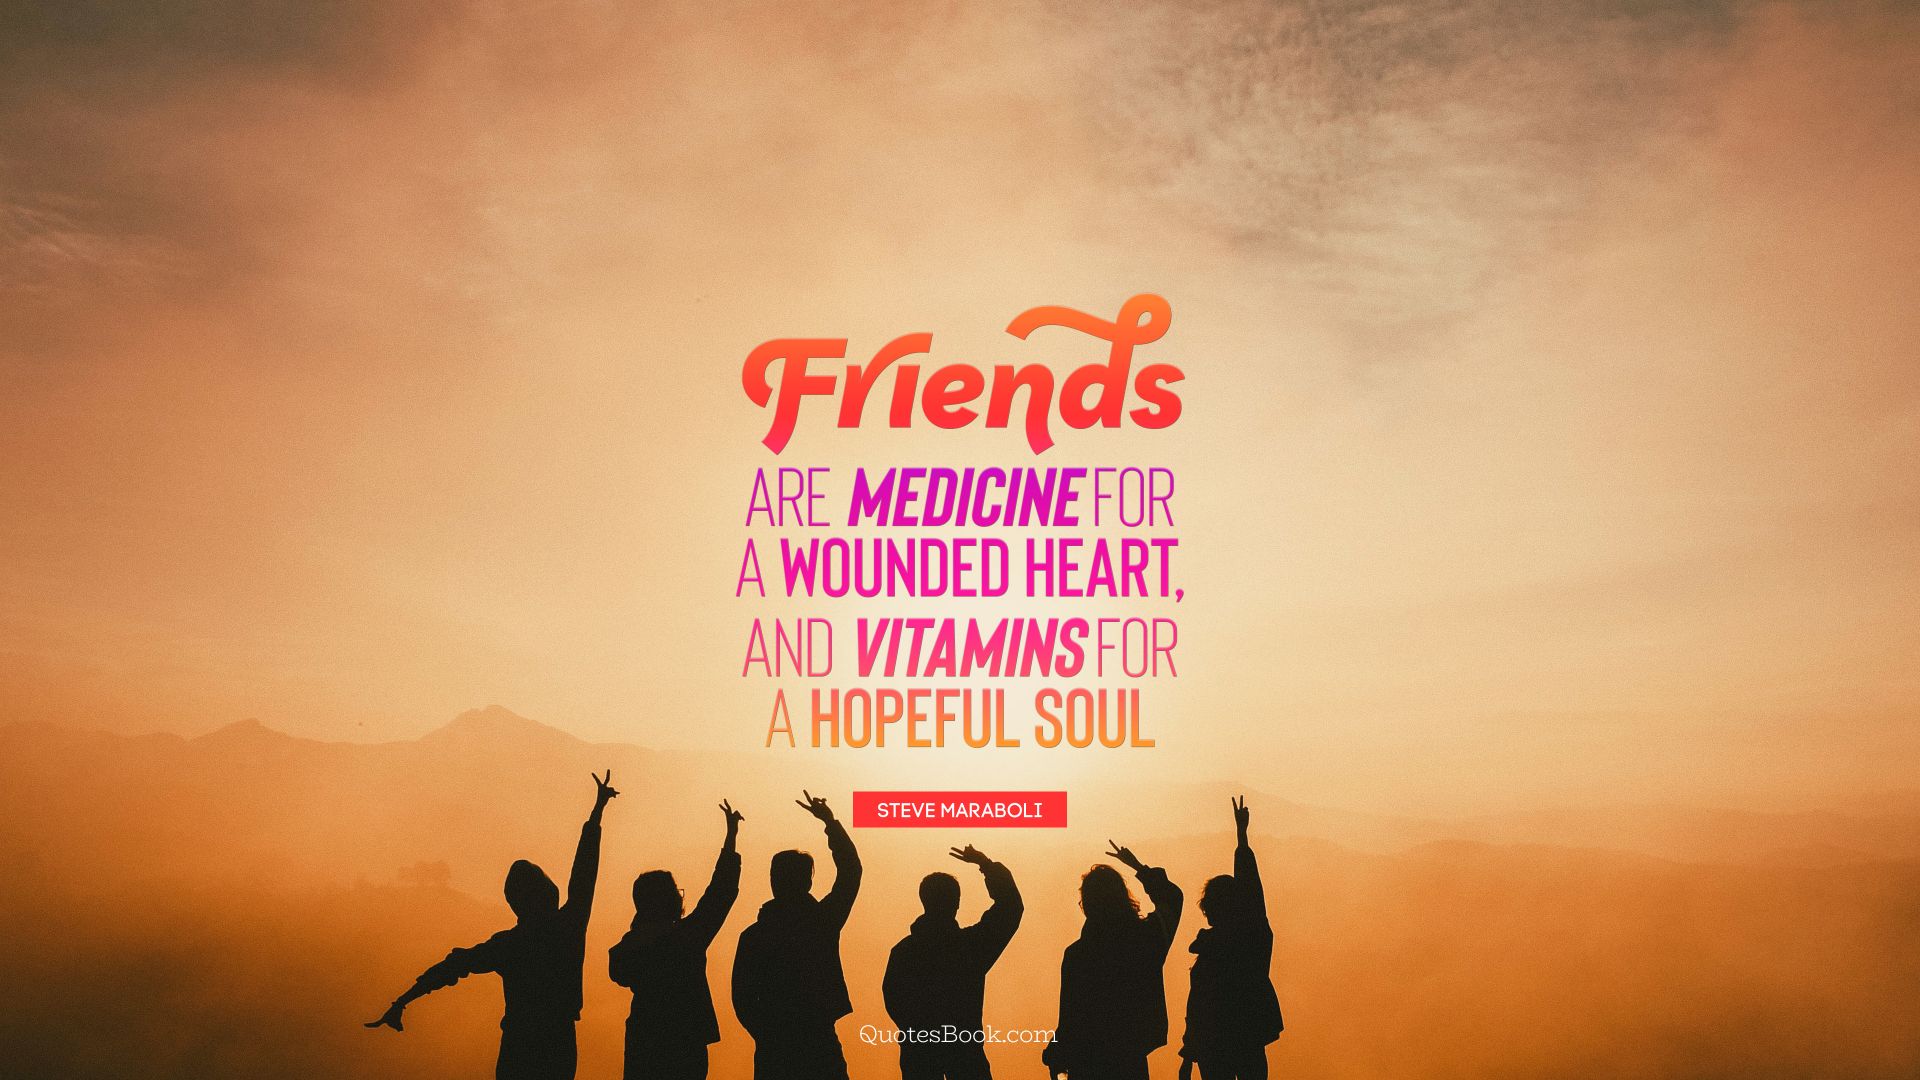 Friends are medicine for a wounded heart, and vitamins for a hopeful soul. - Quote by Steve Maraboli